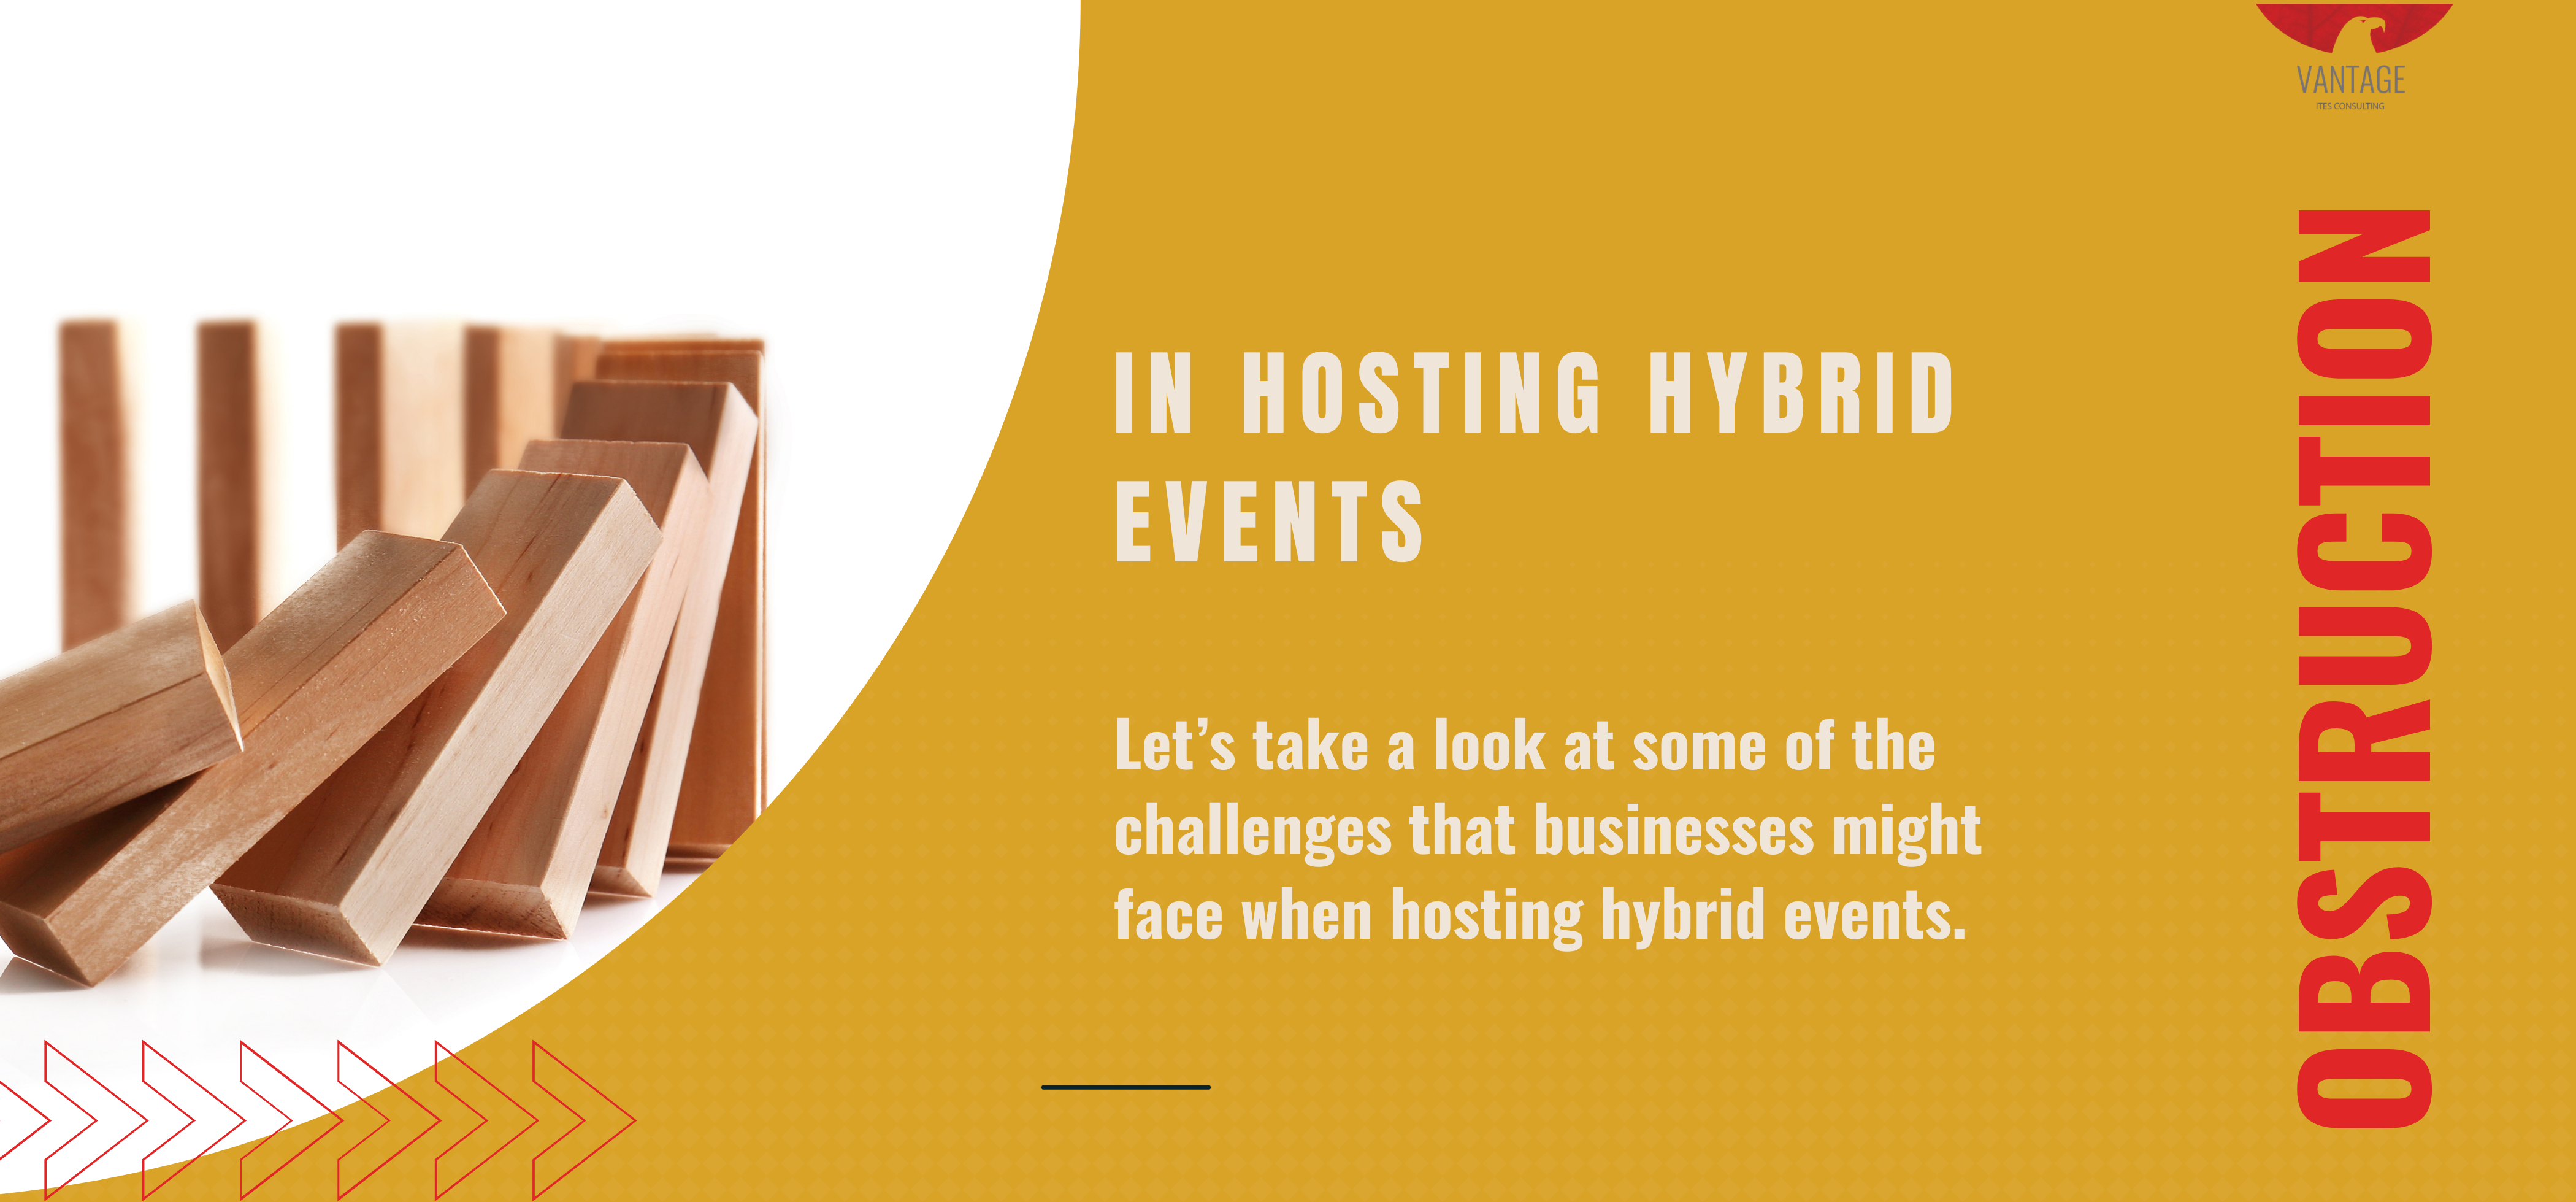 Challenges in hosting hybrid events